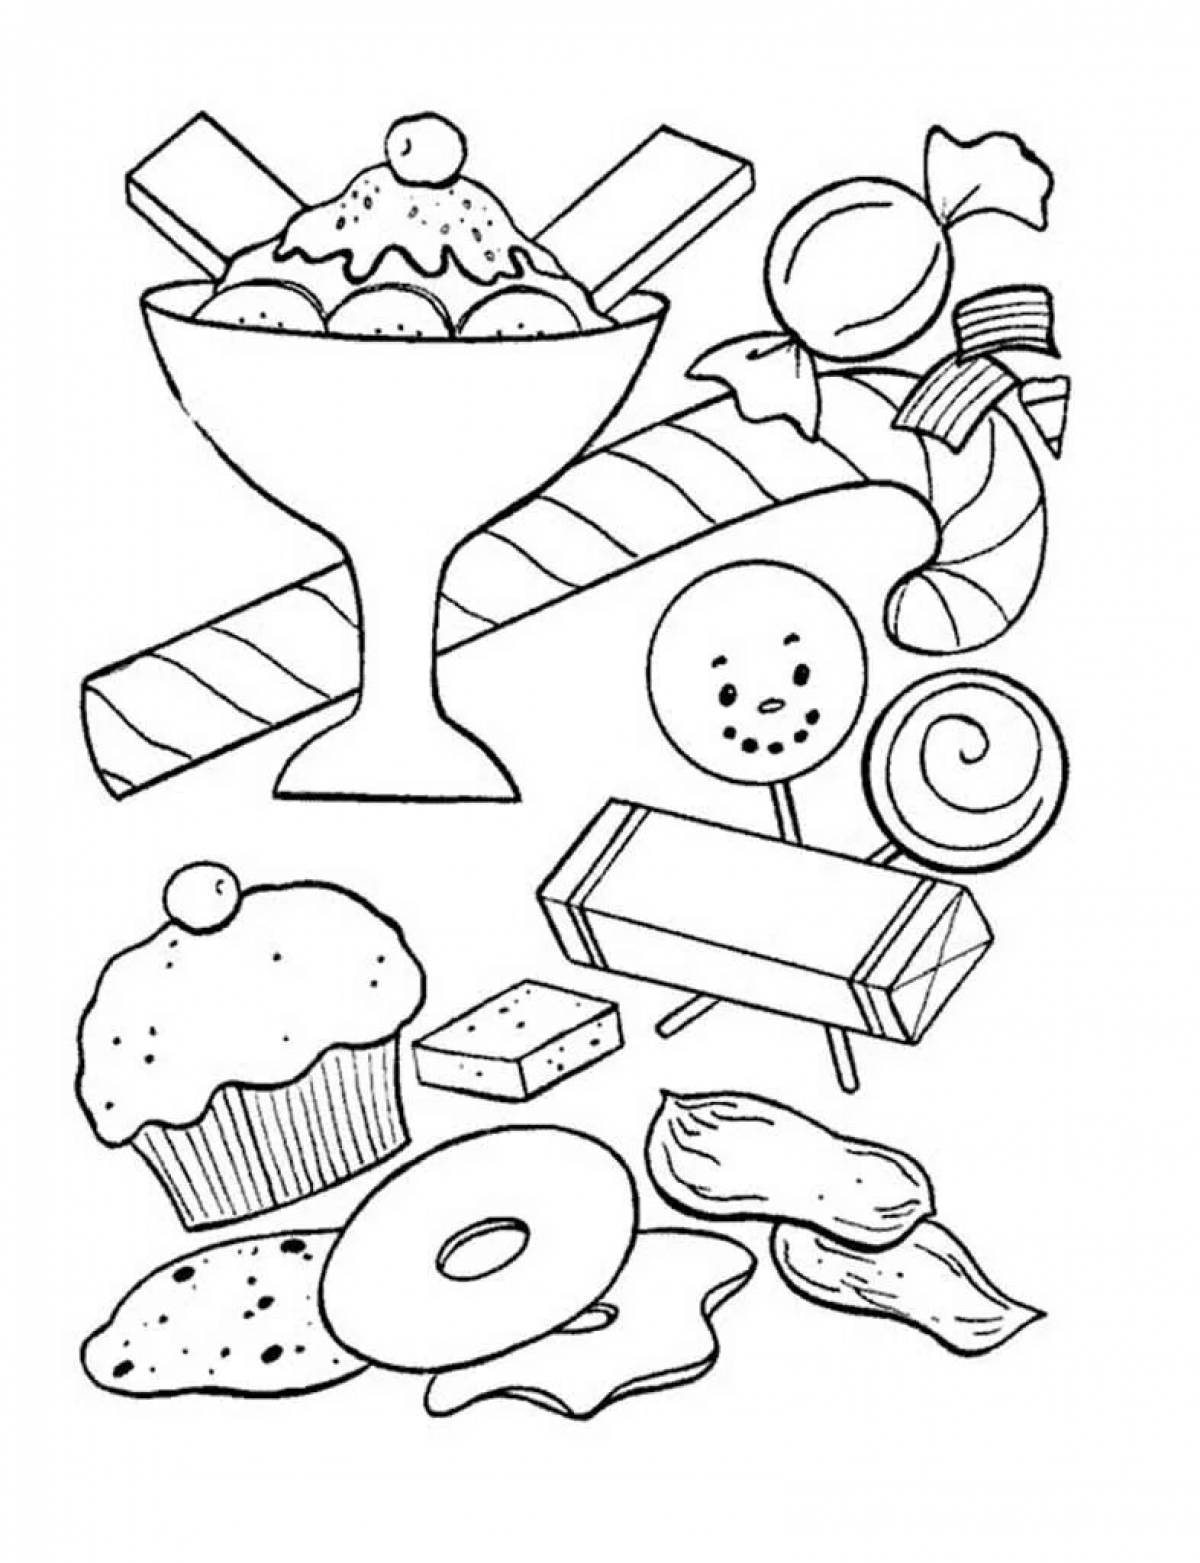 Intriguing sweets coloring page